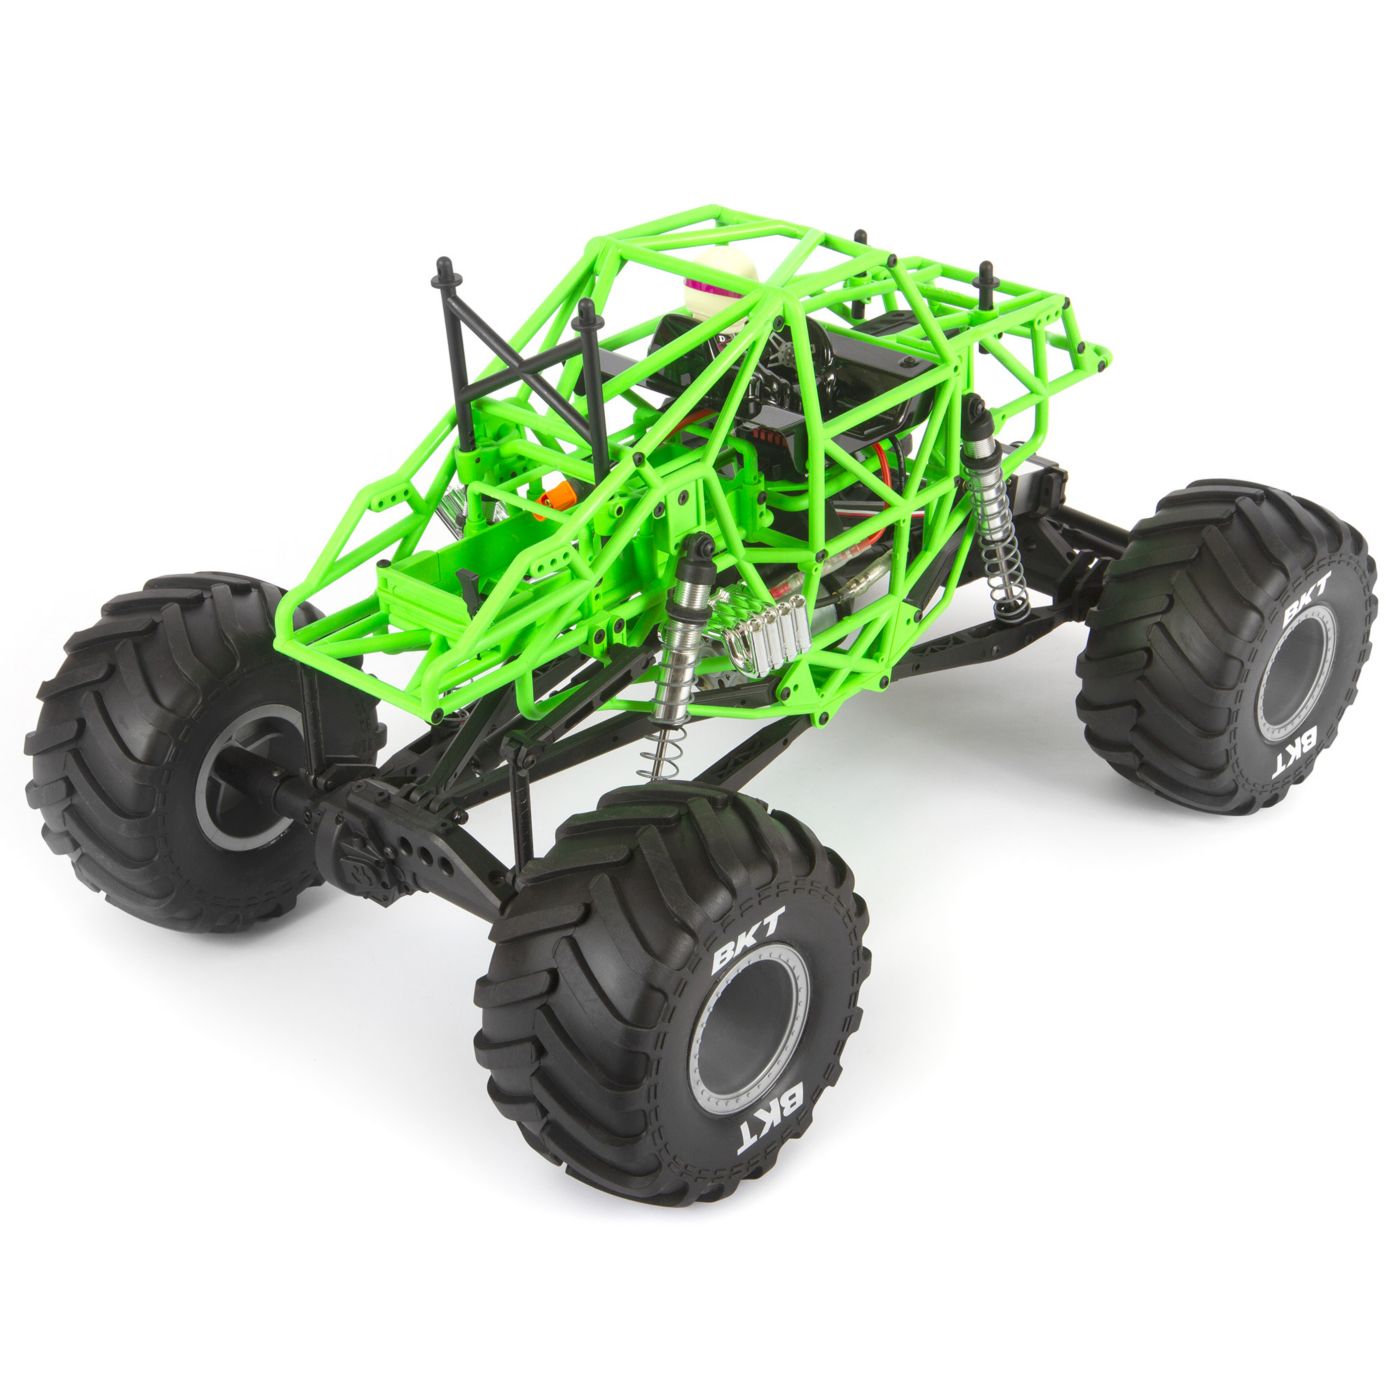 Axial SMT10 Grave Digger RTR Monster Truck - Chassis